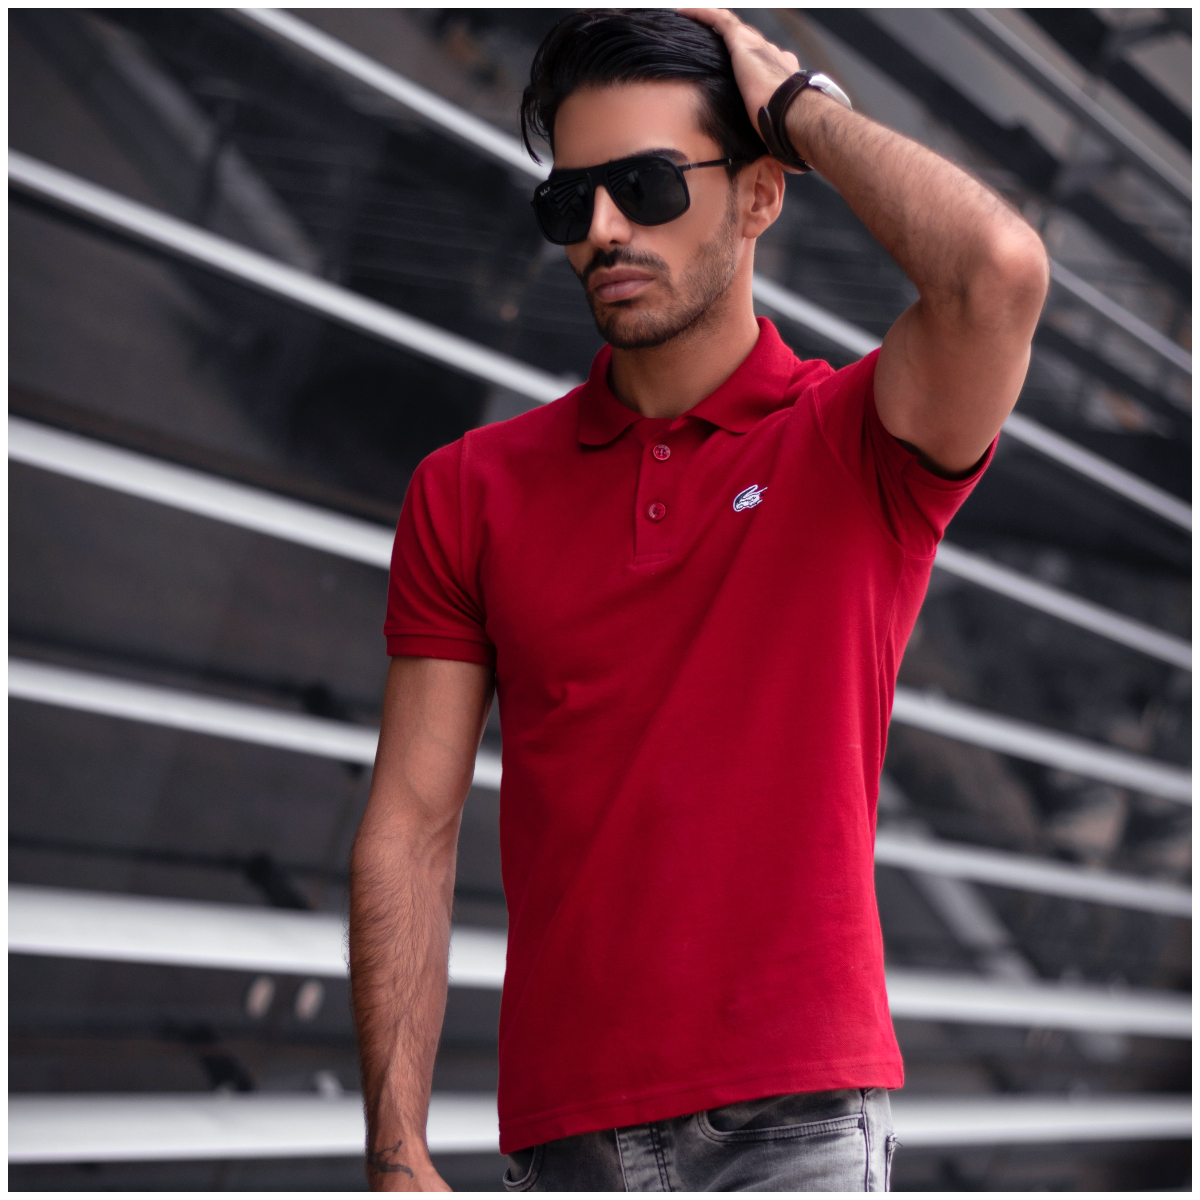 middernacht Verduisteren tijger 15 Best polo T-shirts for men that are a WIN-WIN piece for work or play |  PINKVILLA